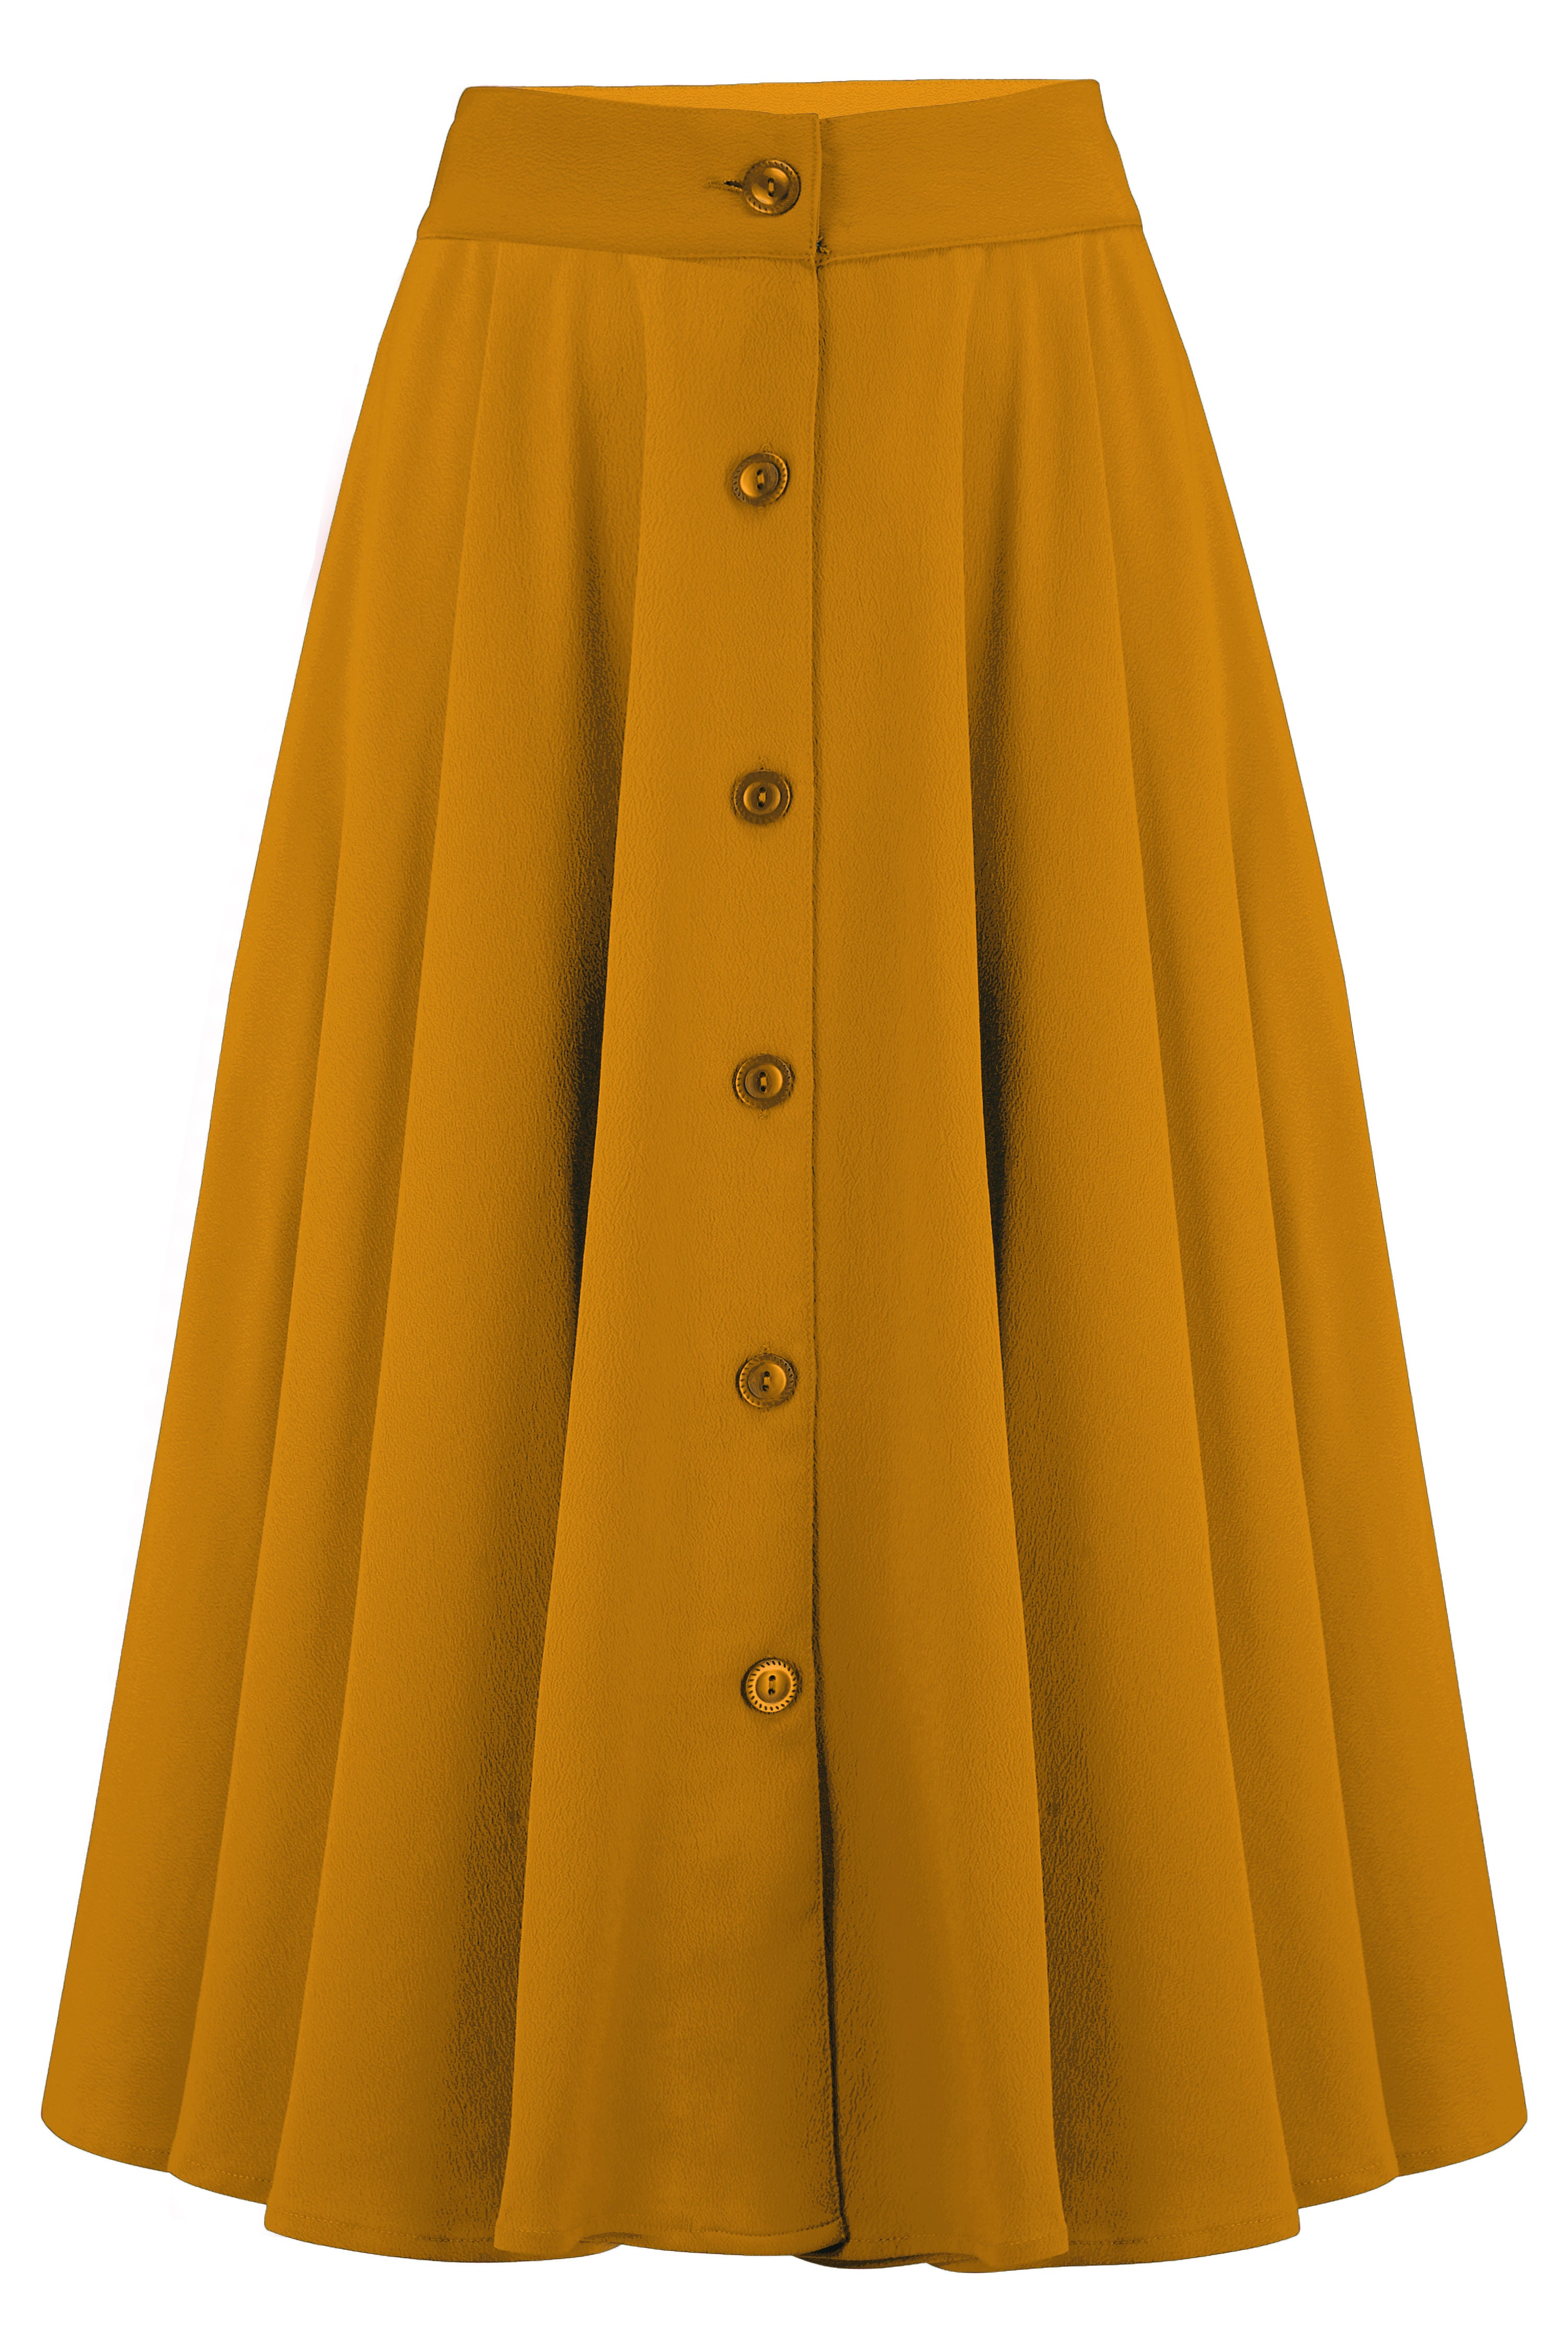 Vintage Skirts | Retro, Pencil, Swing, Boho The Beverly Button Front Full Circle Skirt with Pockets in Solid Mustard True 1950s Vintage Style £39.00 AT vintagedancer.com